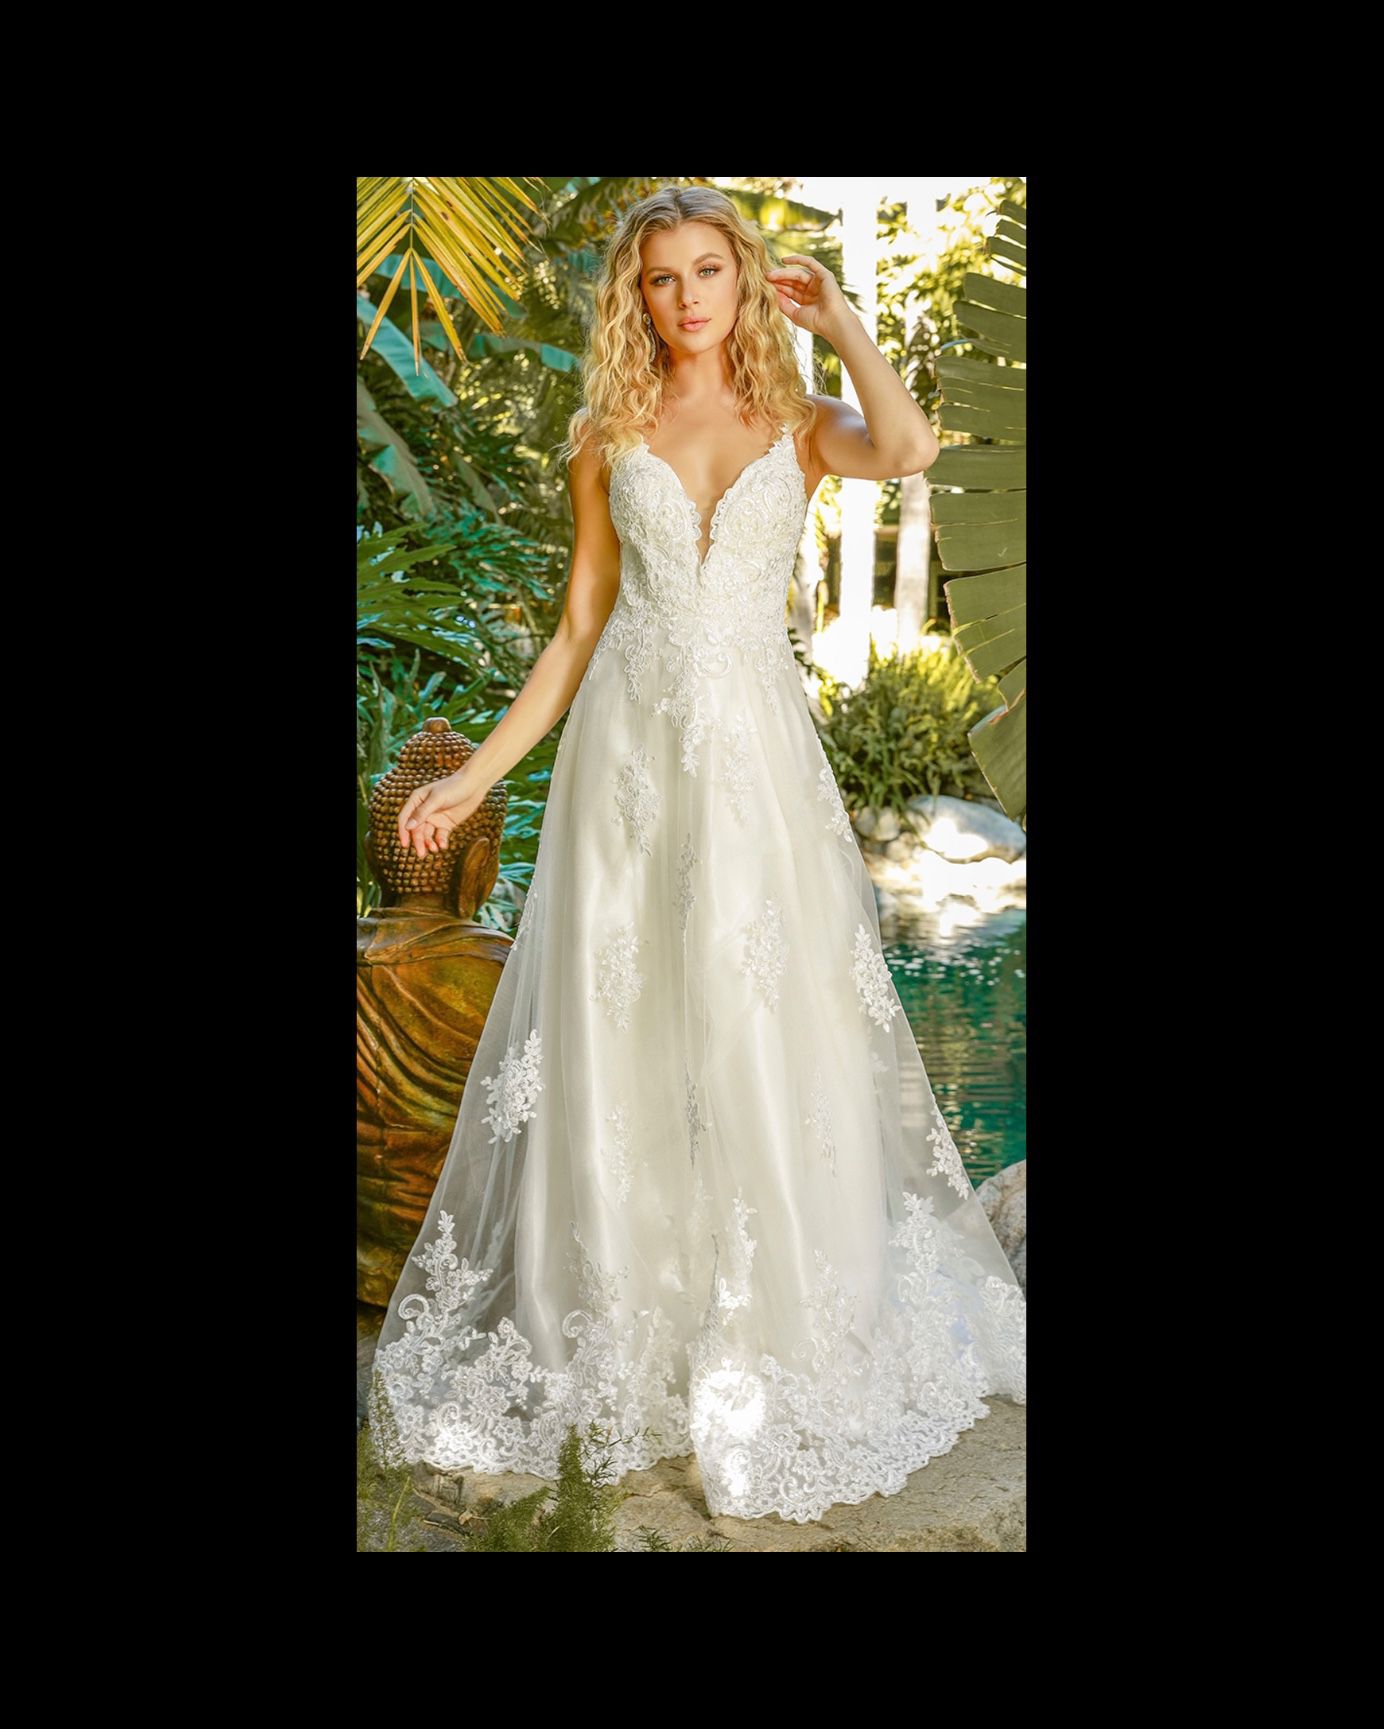 New With Tags Wedding Gown $335